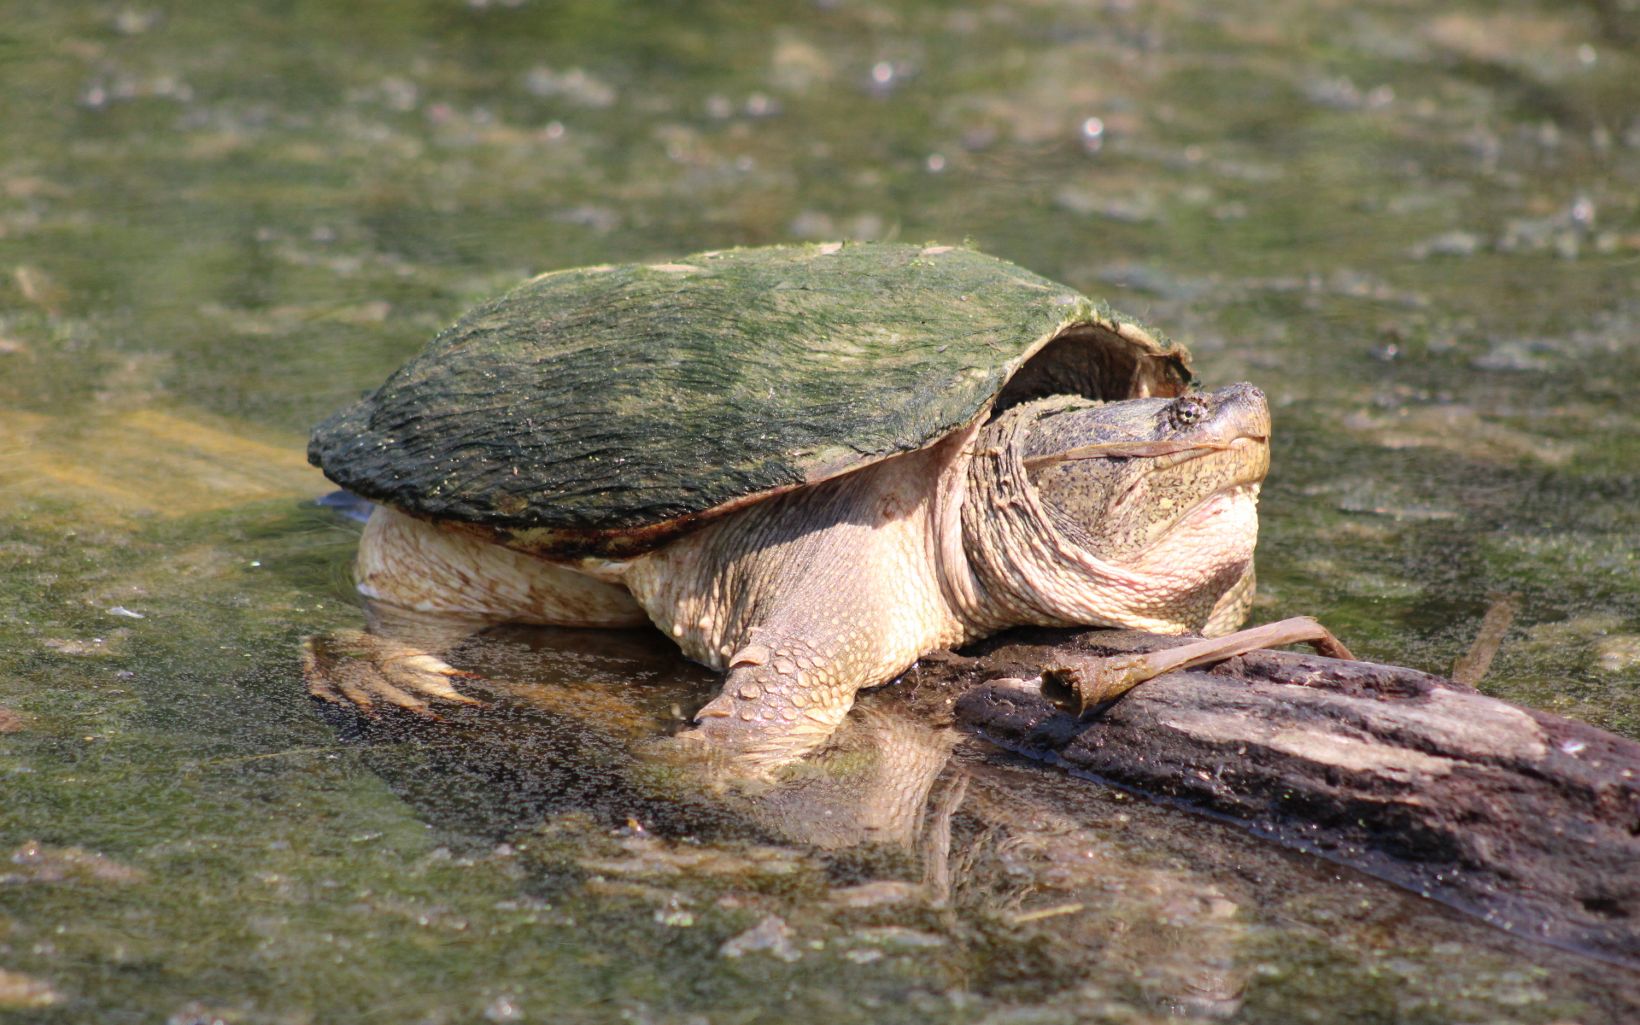 Common Snapping Turtle The largest turtles in Ohio, common snapping turtles can weigh up to 35 pounds and can be found just about anywhere there is water in the state. © Cassie Barnes